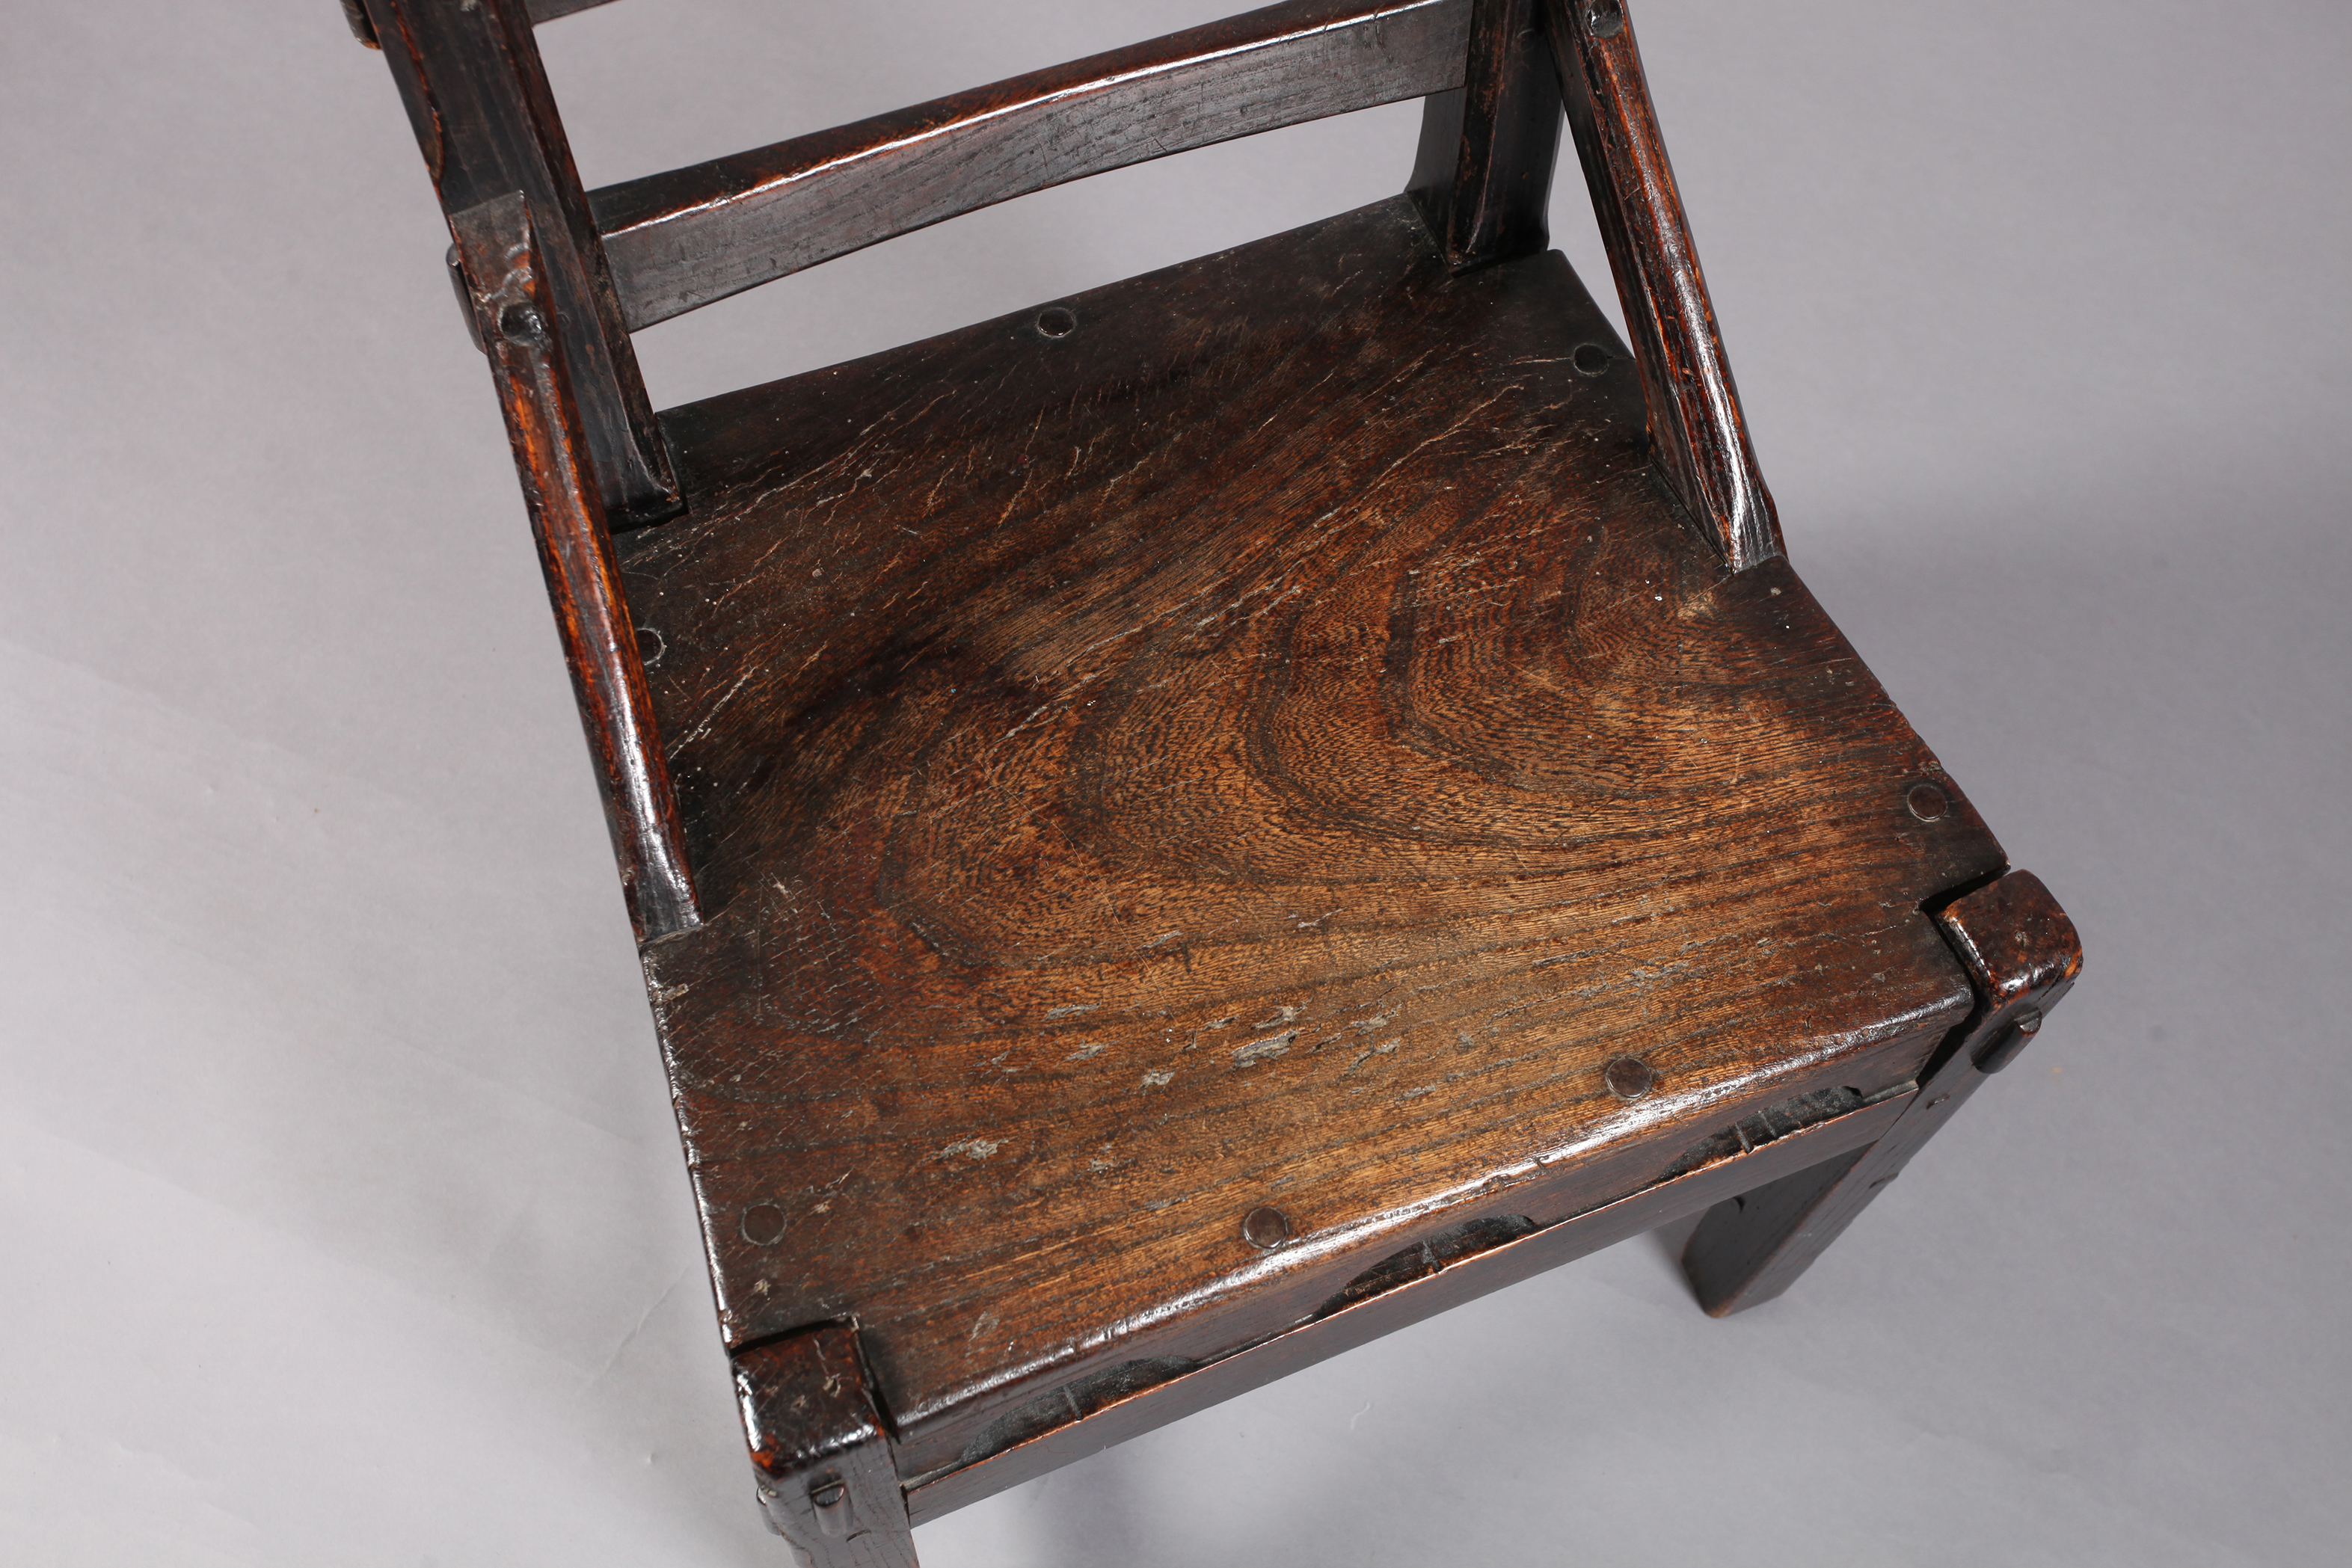 A PRIMITIVE 19TH CENTURY ELM LADDER BACK CHAIR with pegged projecting joints and sloping side - Image 3 of 4